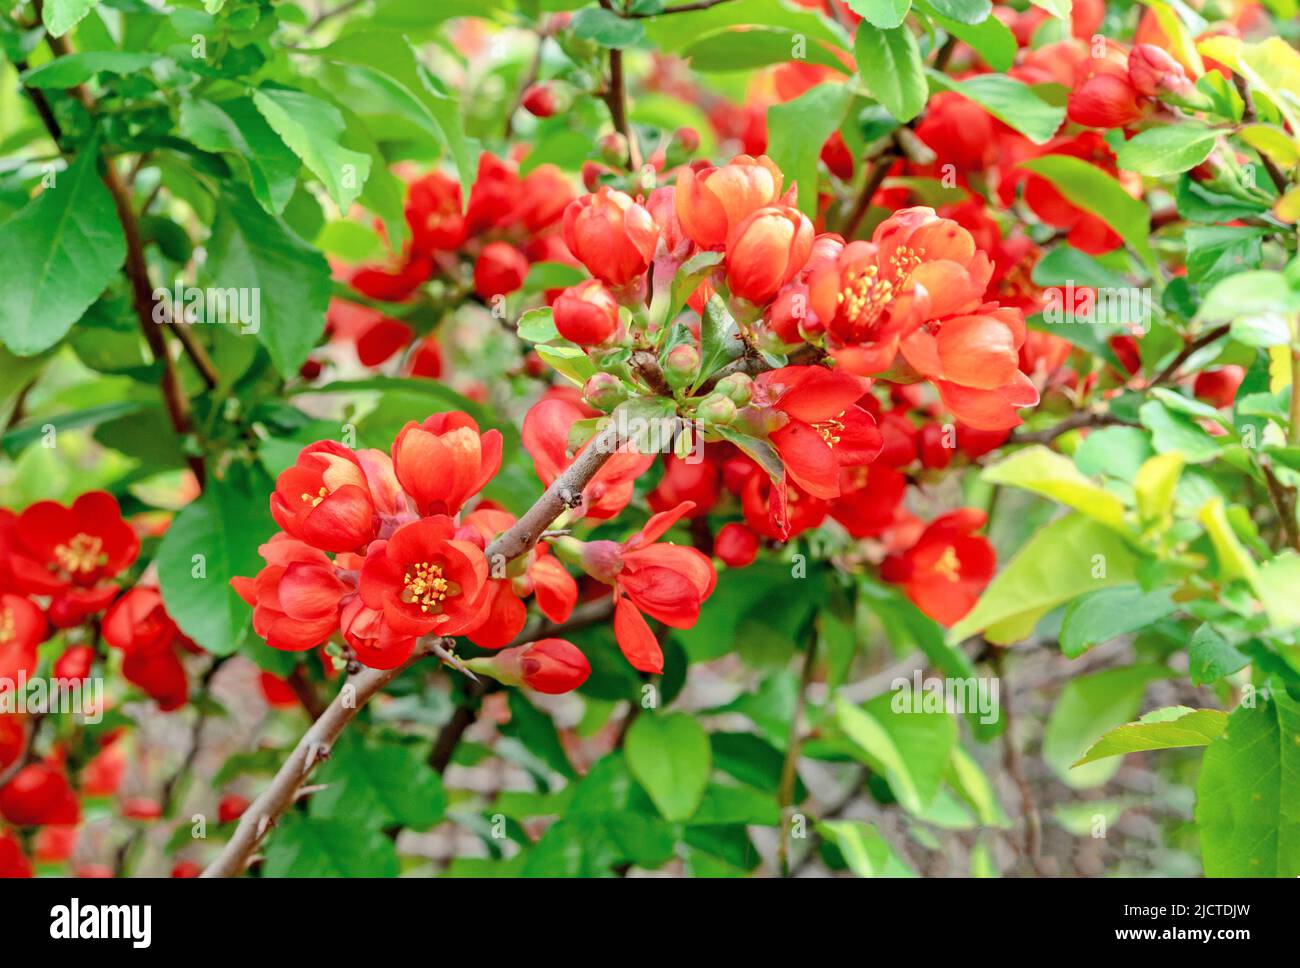 Japanese quince flowers on a branch. Red-orange inflorescences of chaenomeles. Stock Photo